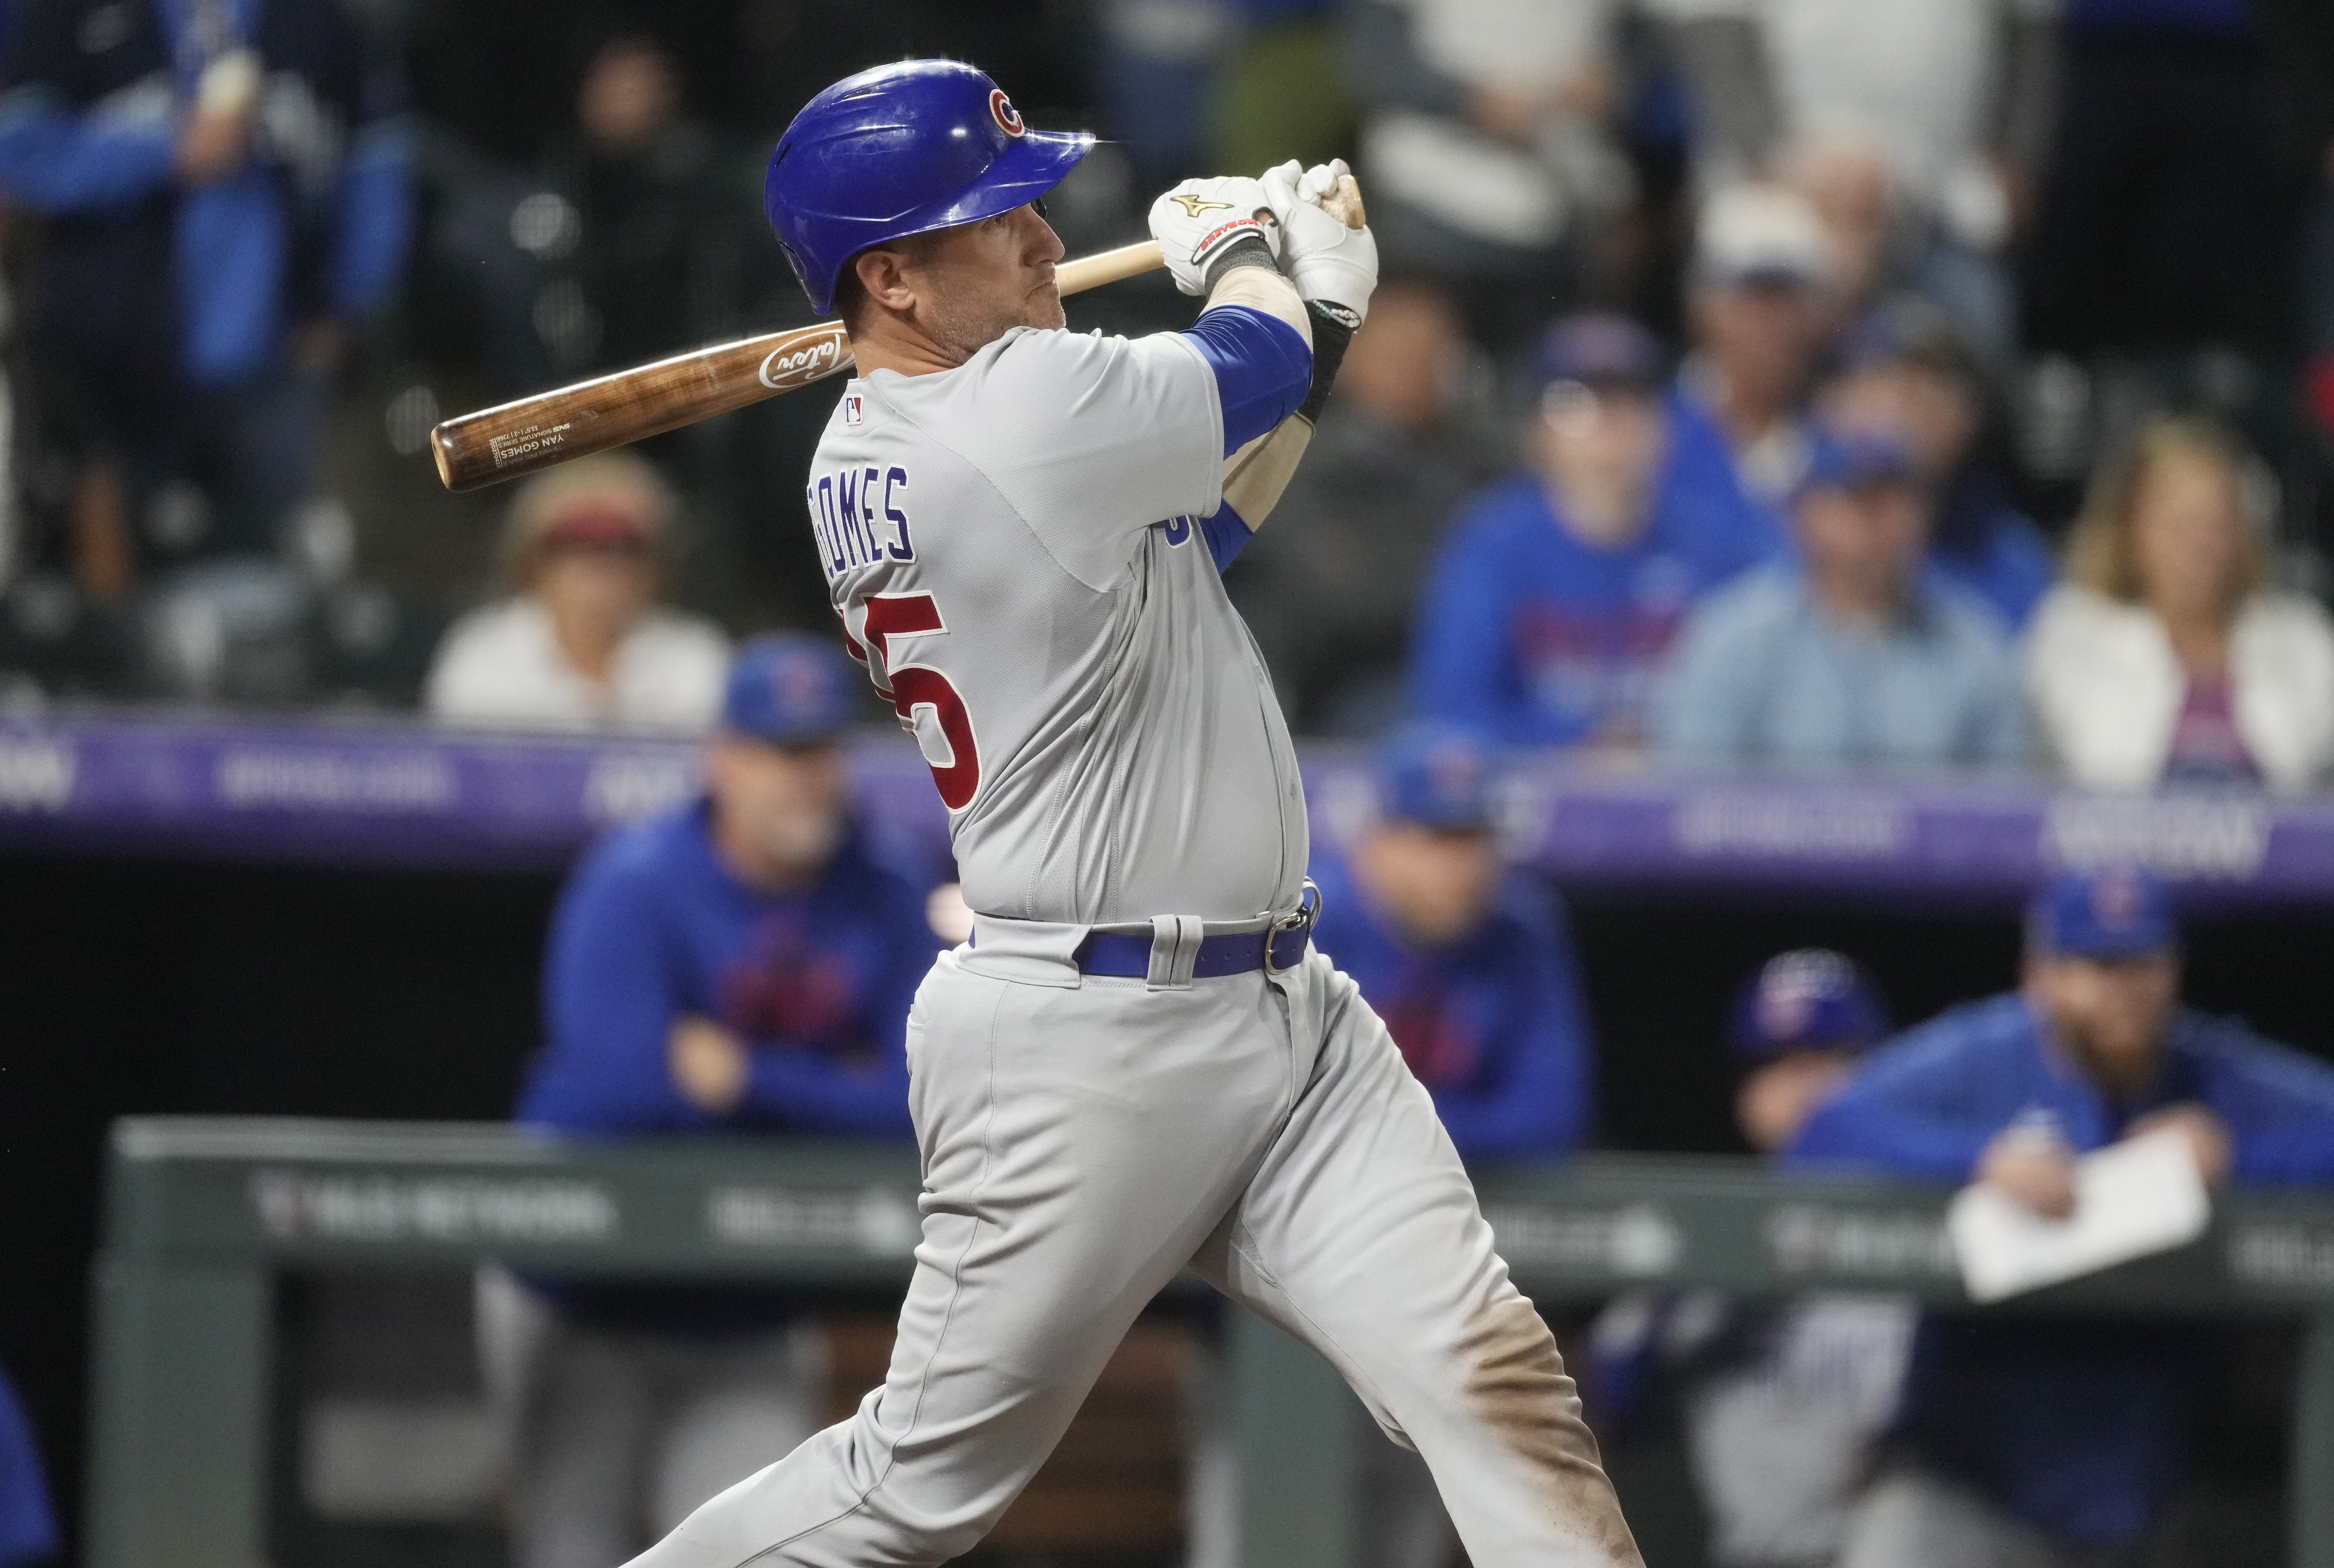 Chicago Cubs rally for 5-4 win over the Colorado Rockies